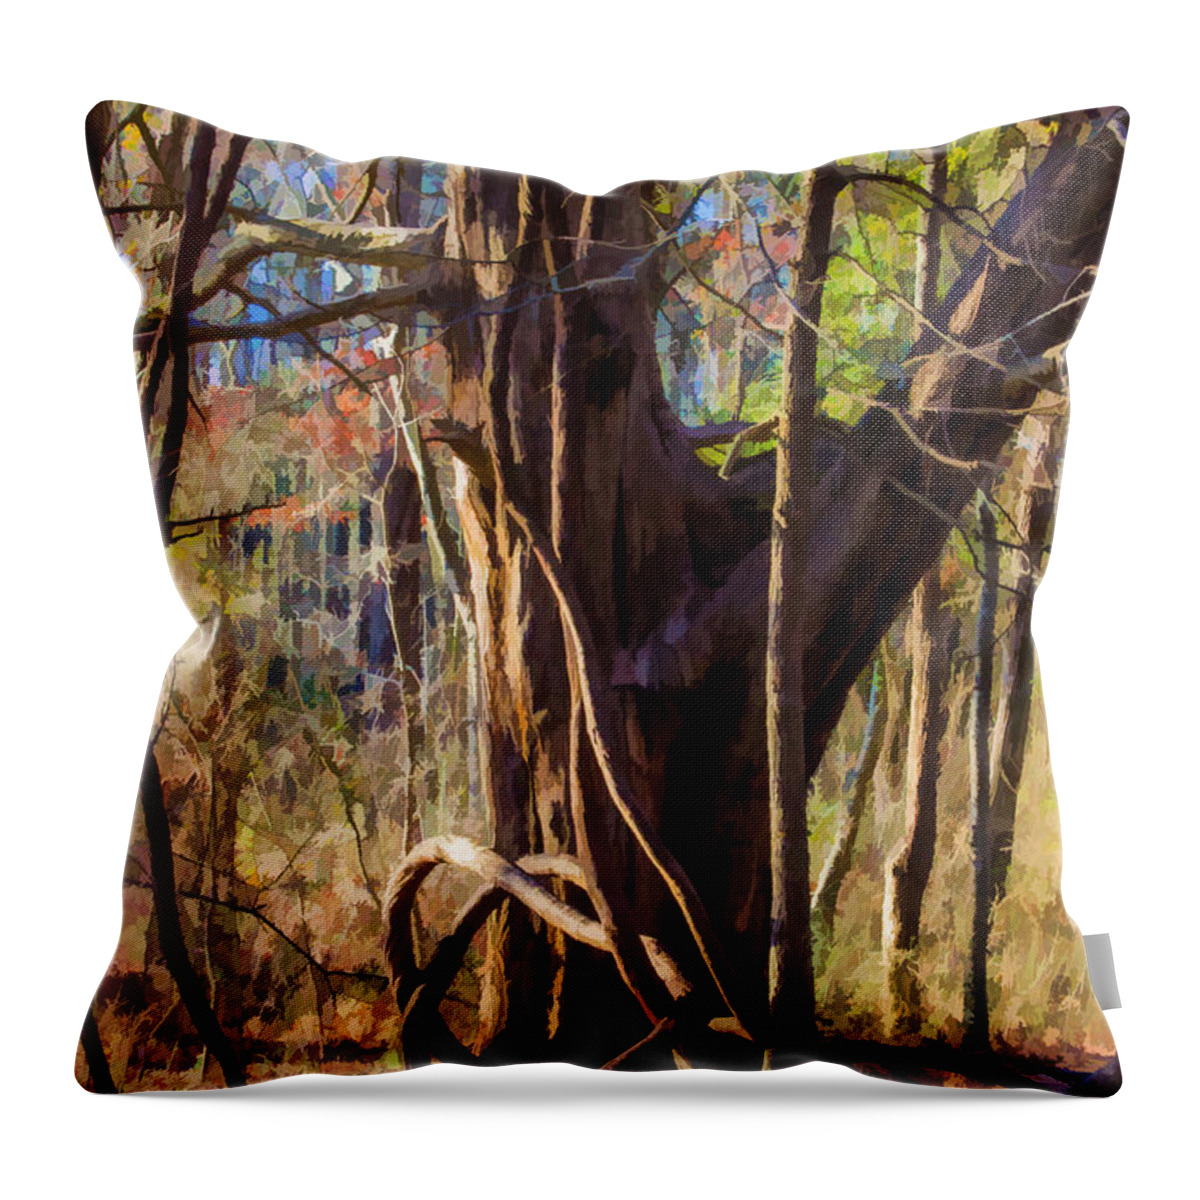 Tangled Throw Pillow featuring the photograph Tangled Vines on Tree by Roberta Byram